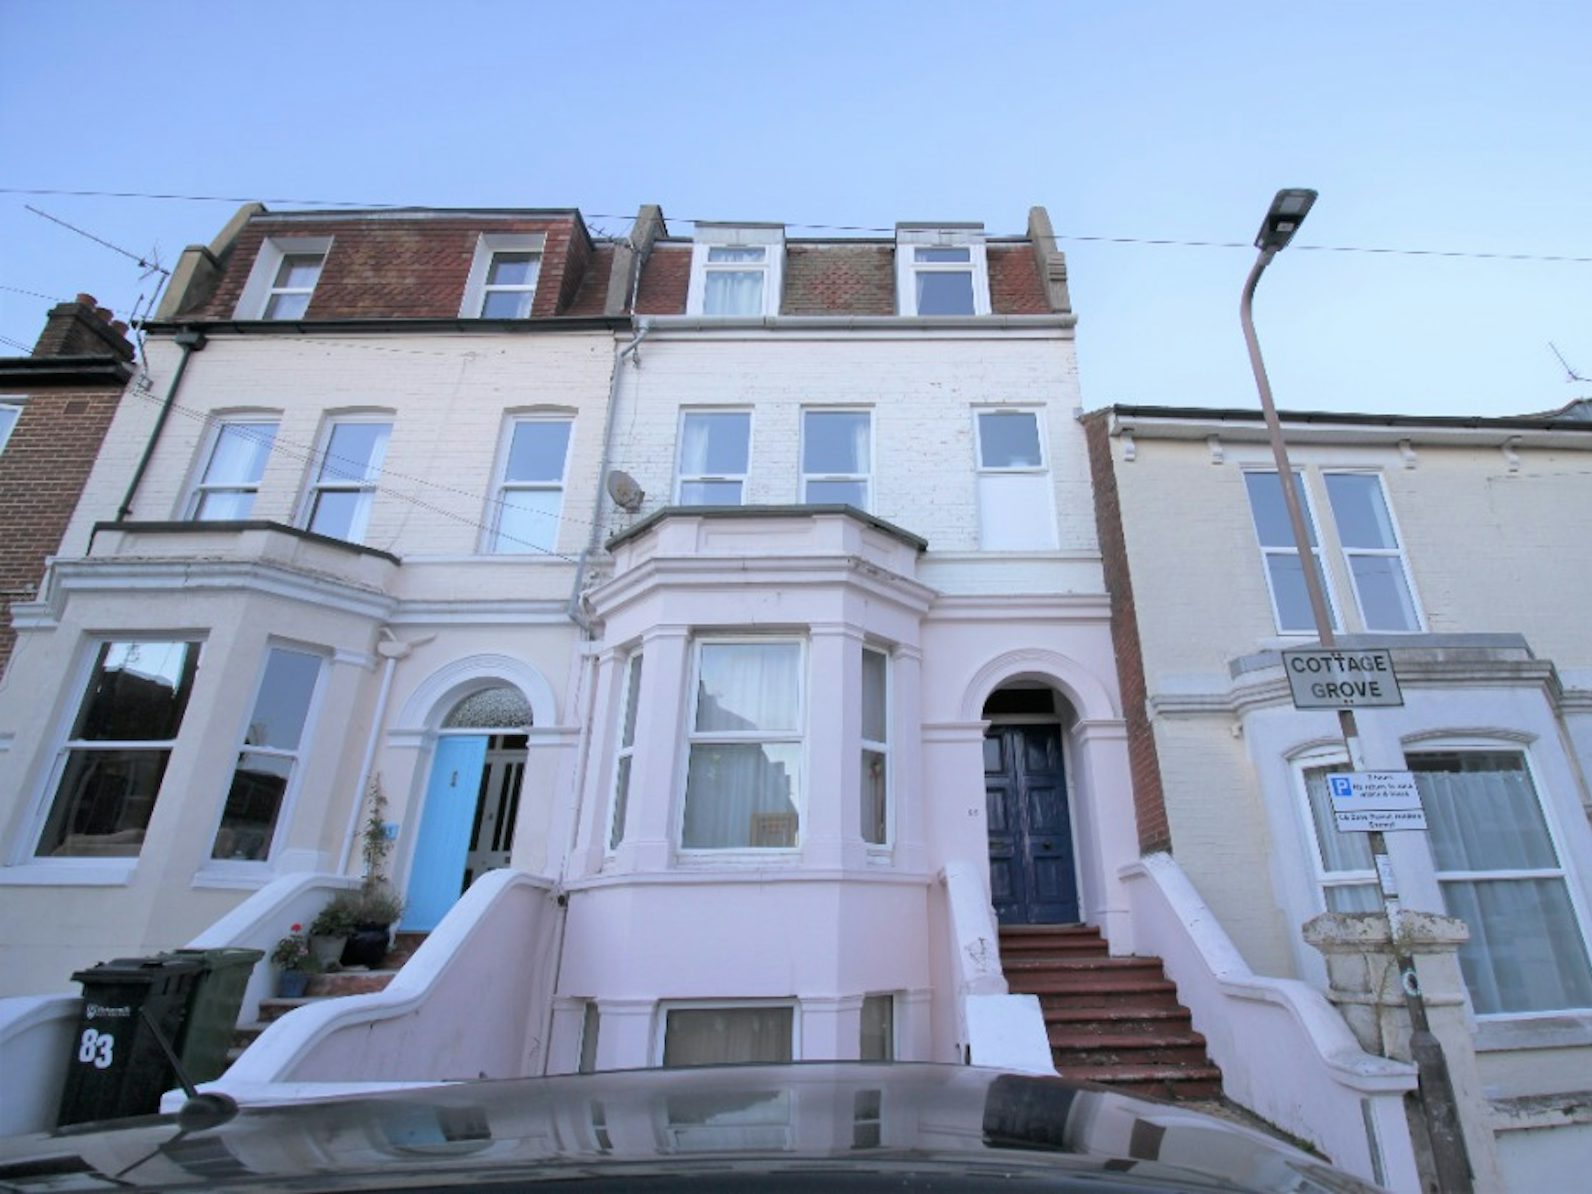 Maisonette to rent on Cottage Grove Southsea, Portsmouth, PO5